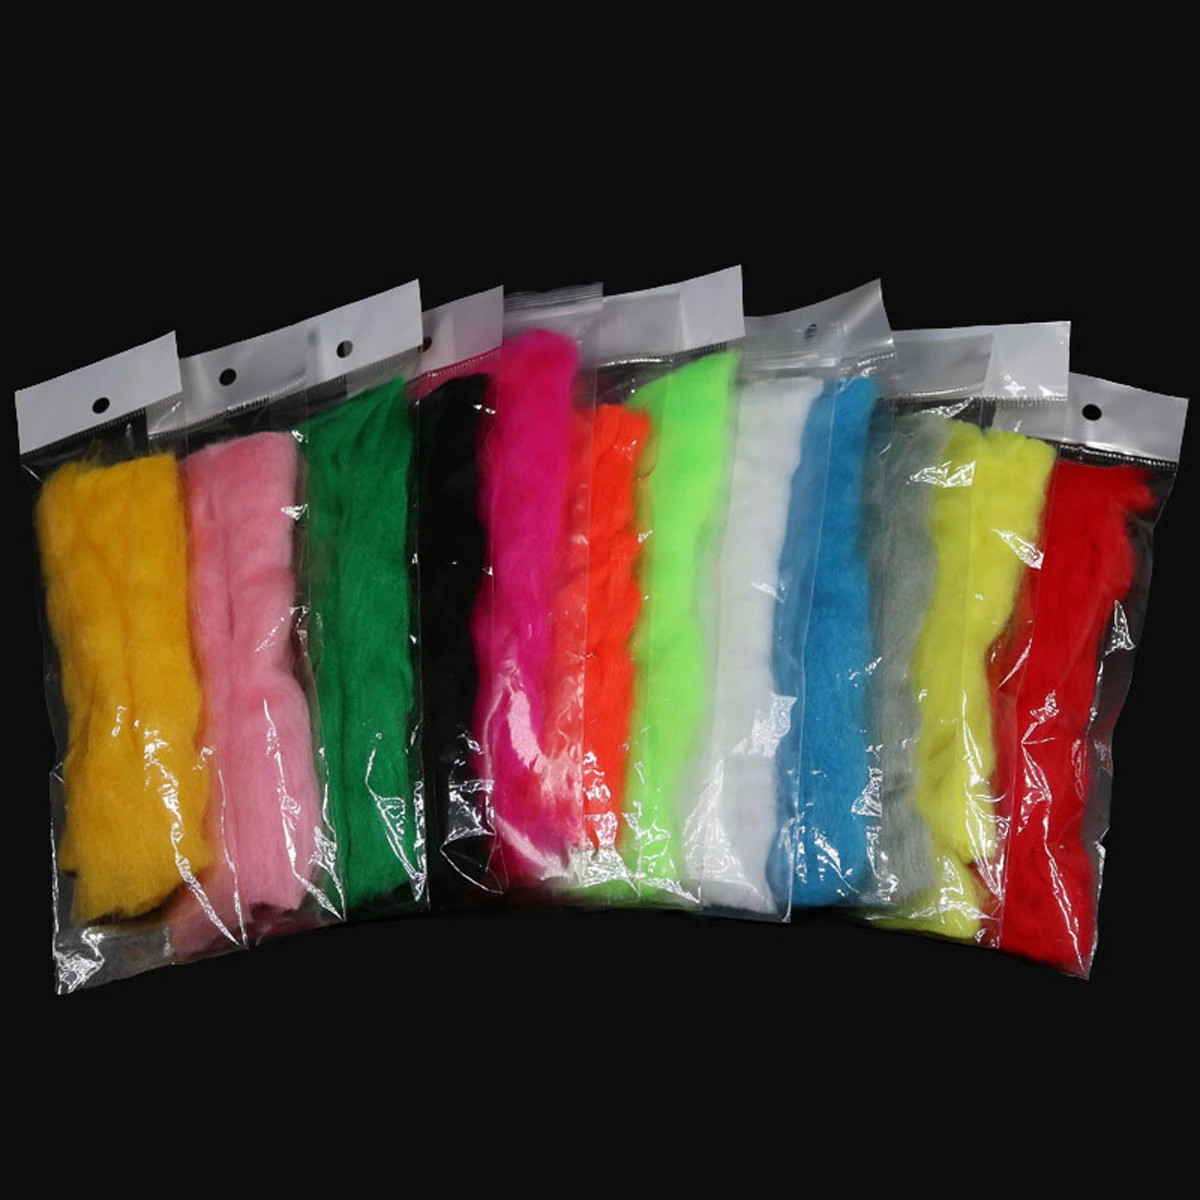 

Multiple Colors Egg Glow Bug Yarn Fiber Baitfish Lure Parachute Trout and Steel head Fly Tying Material, 12 colors